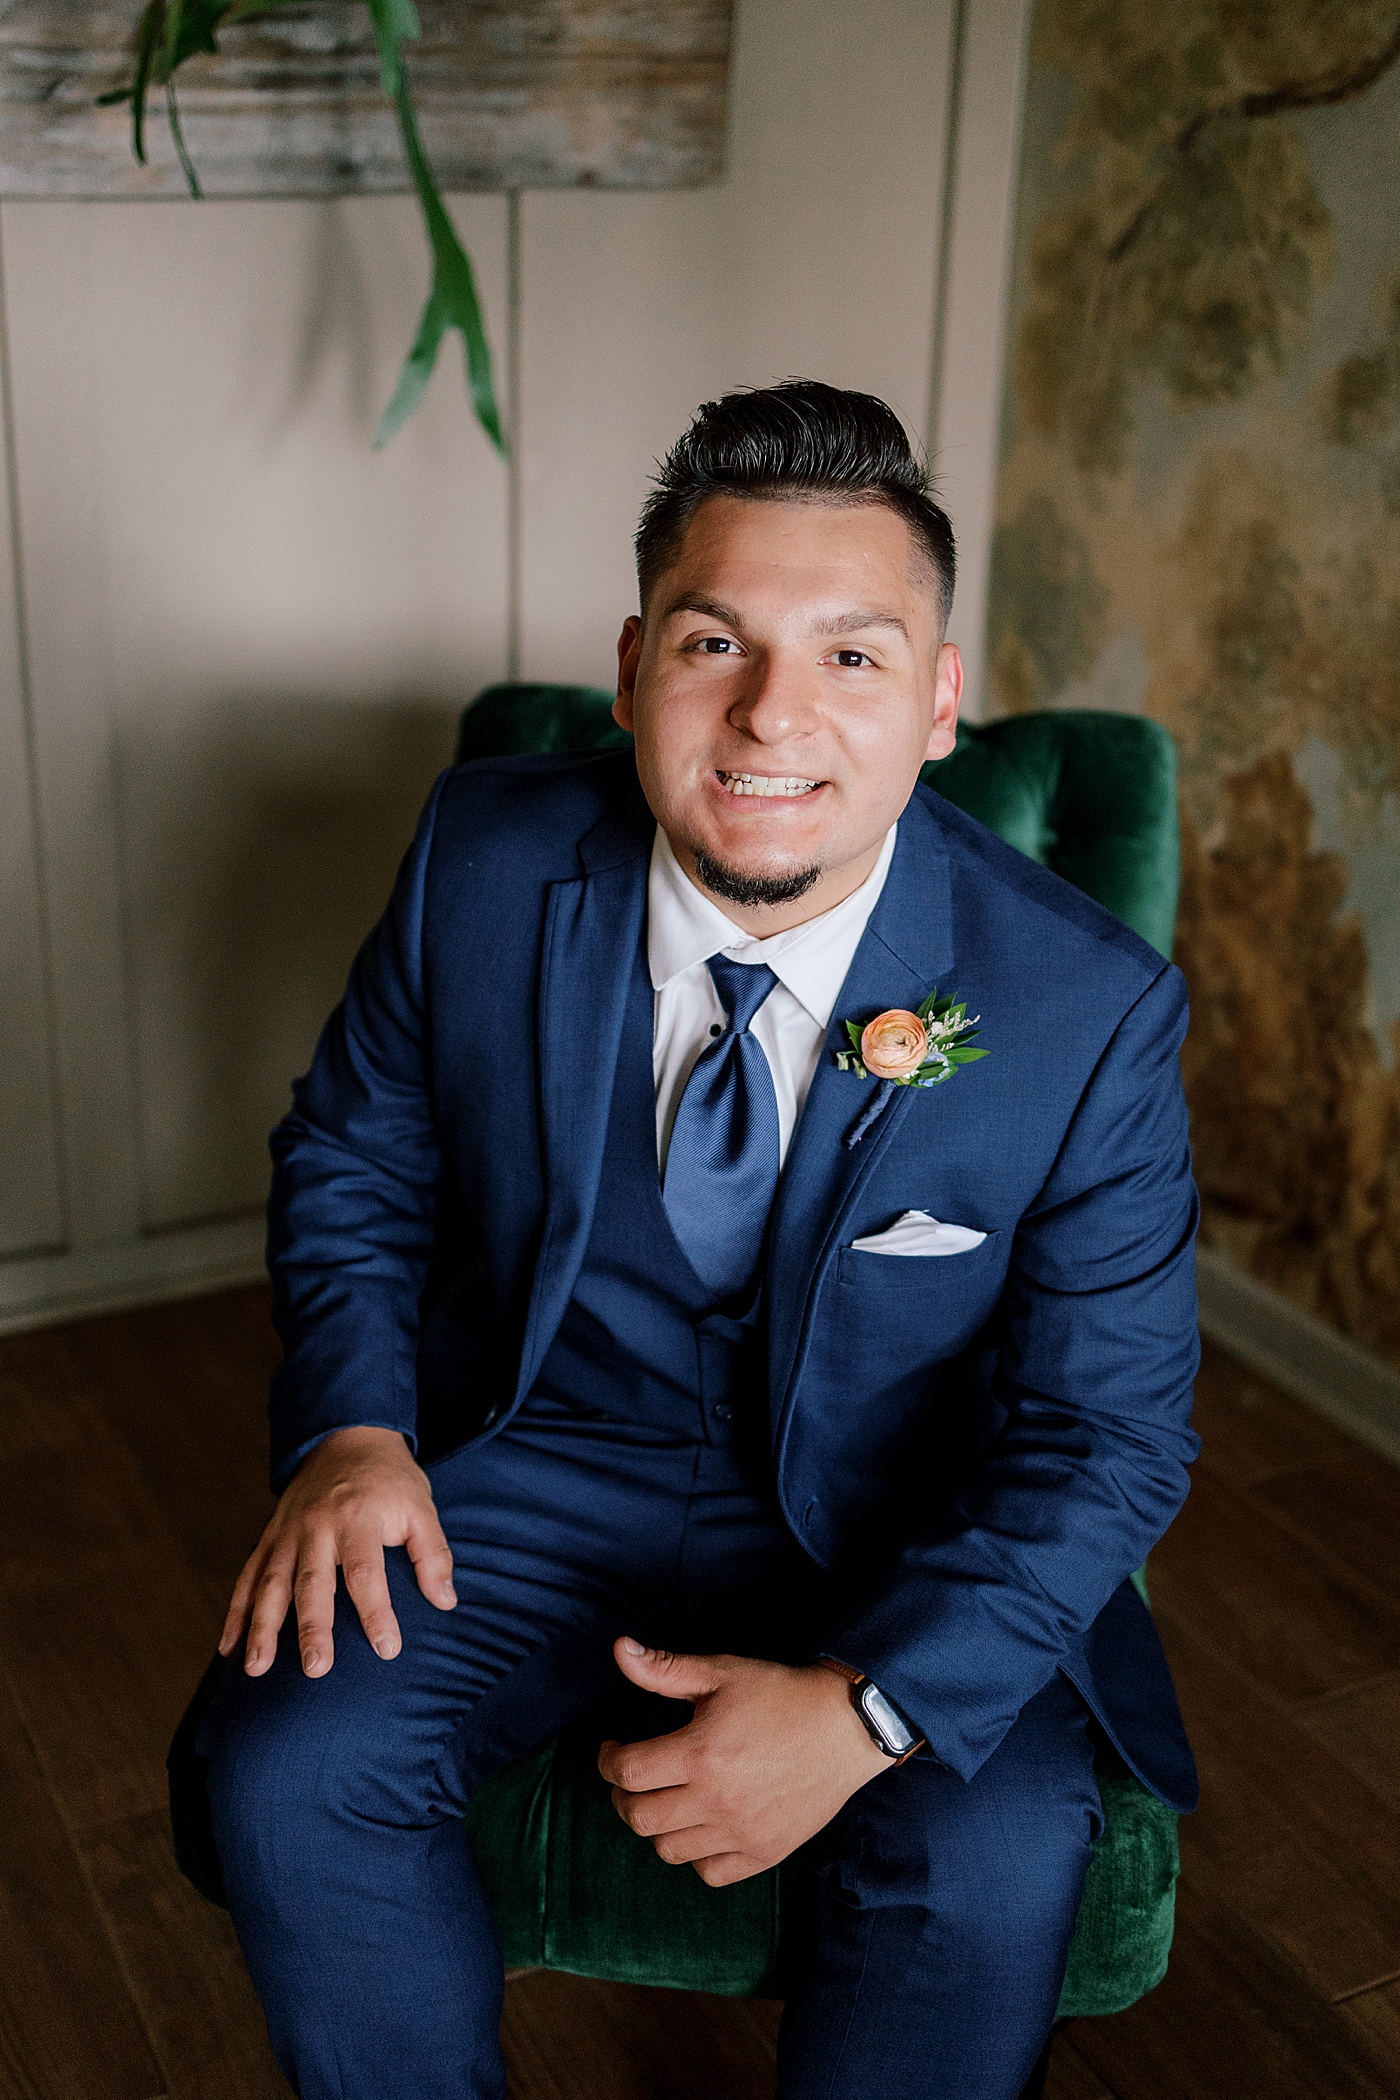 Groom in a navy suit sitting in a green chair smiling | Image by Hope Helmuth Photography 